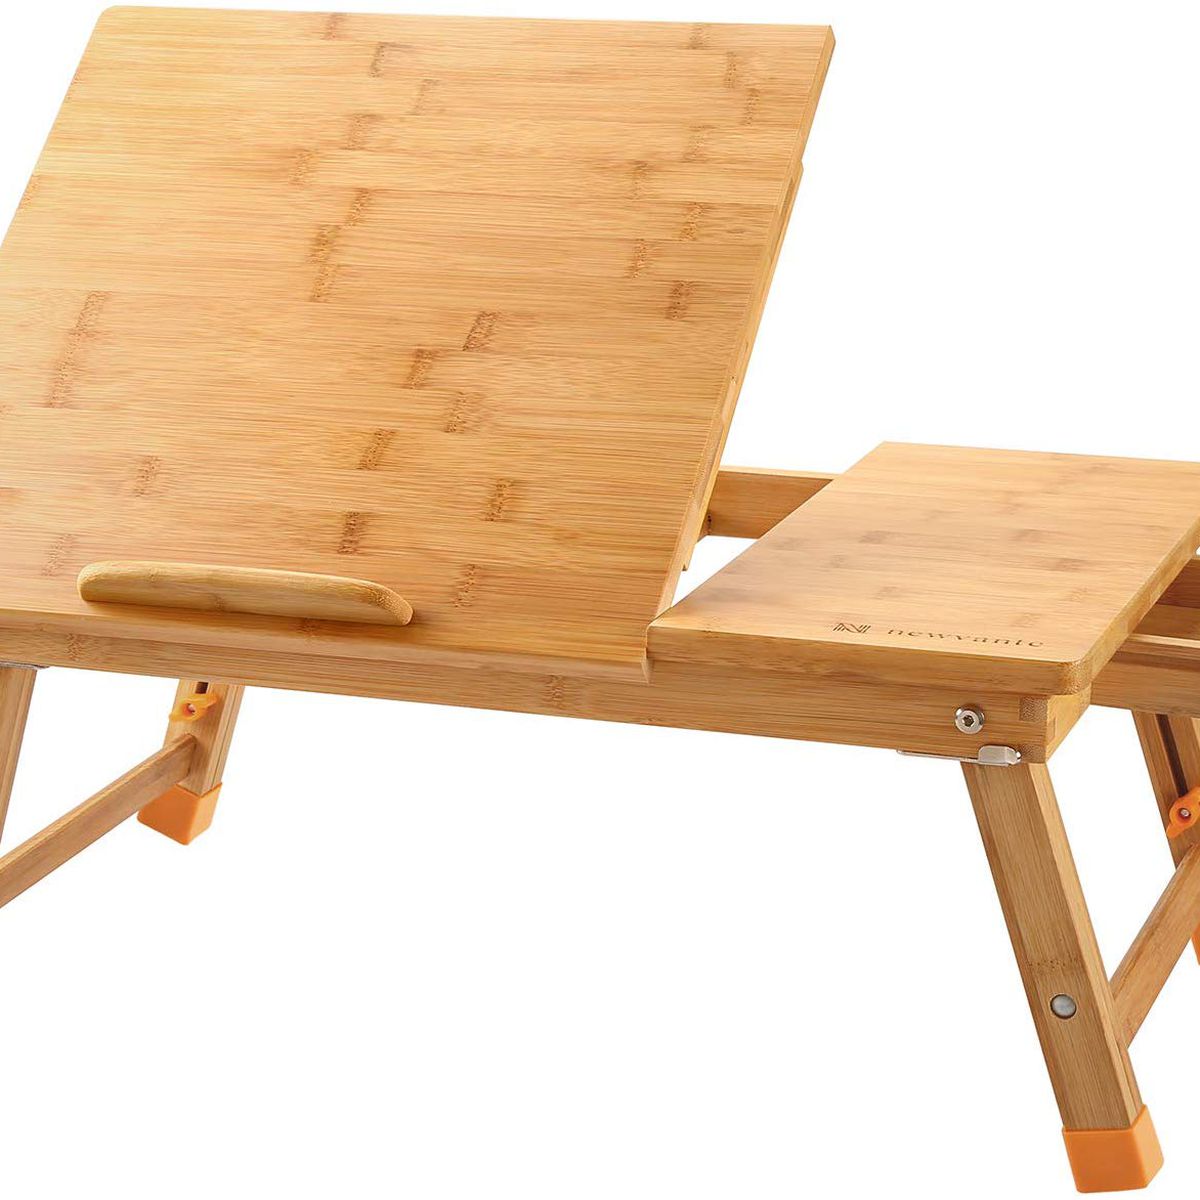 A lap desk made from bamboo. 